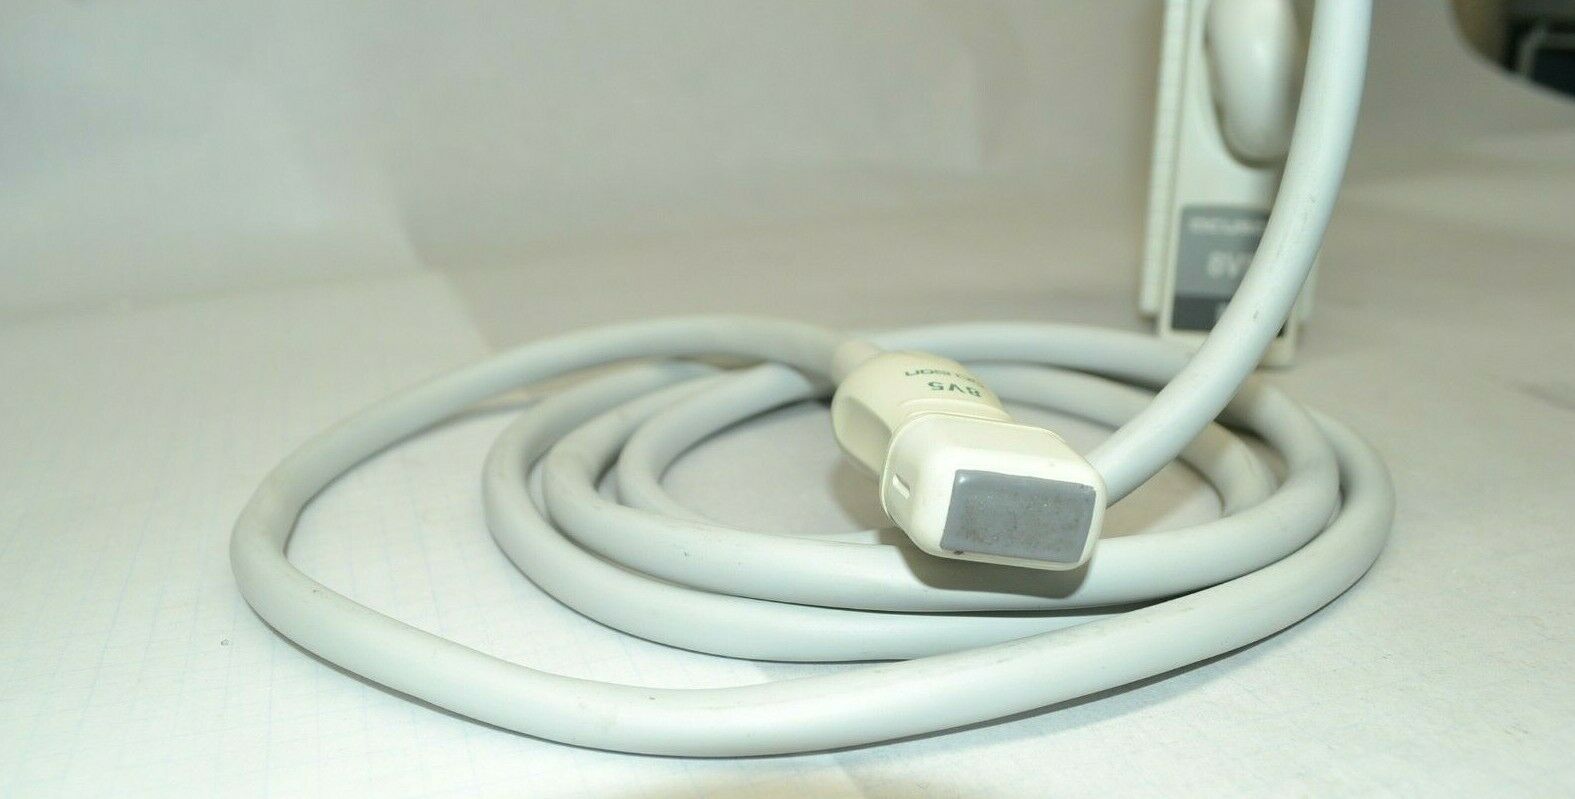 Siemens Acuson 8L5 Linear Ultrasound Probe USED DIAGNOSTIC ULTRASOUND MACHINES FOR SALE